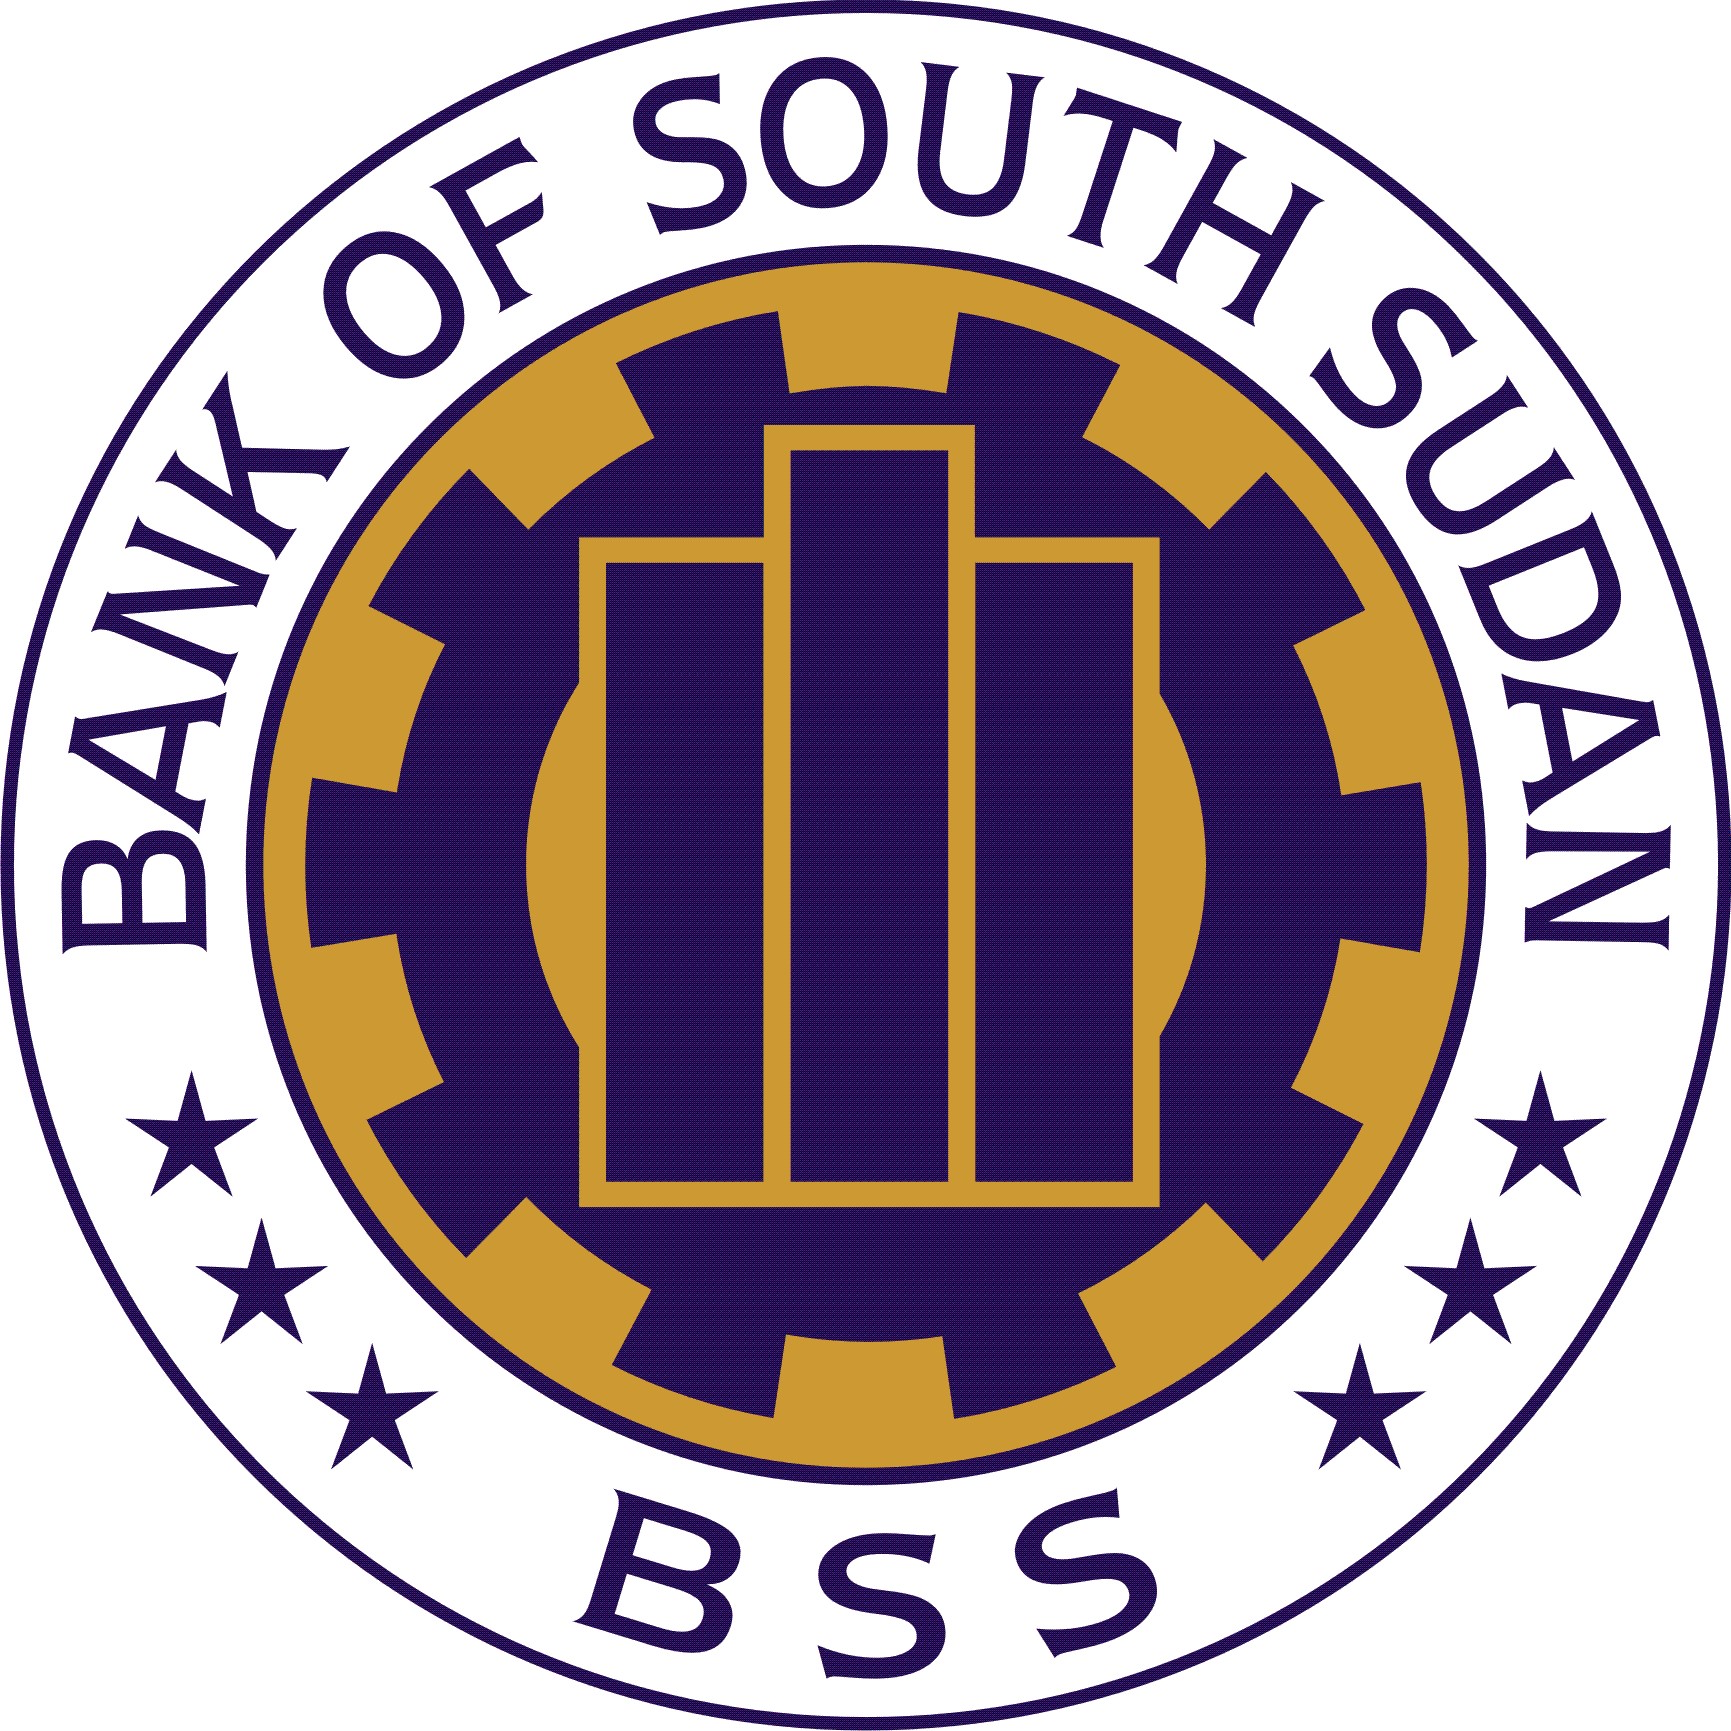 BoSS refutes reports on change of current South Sudan pound